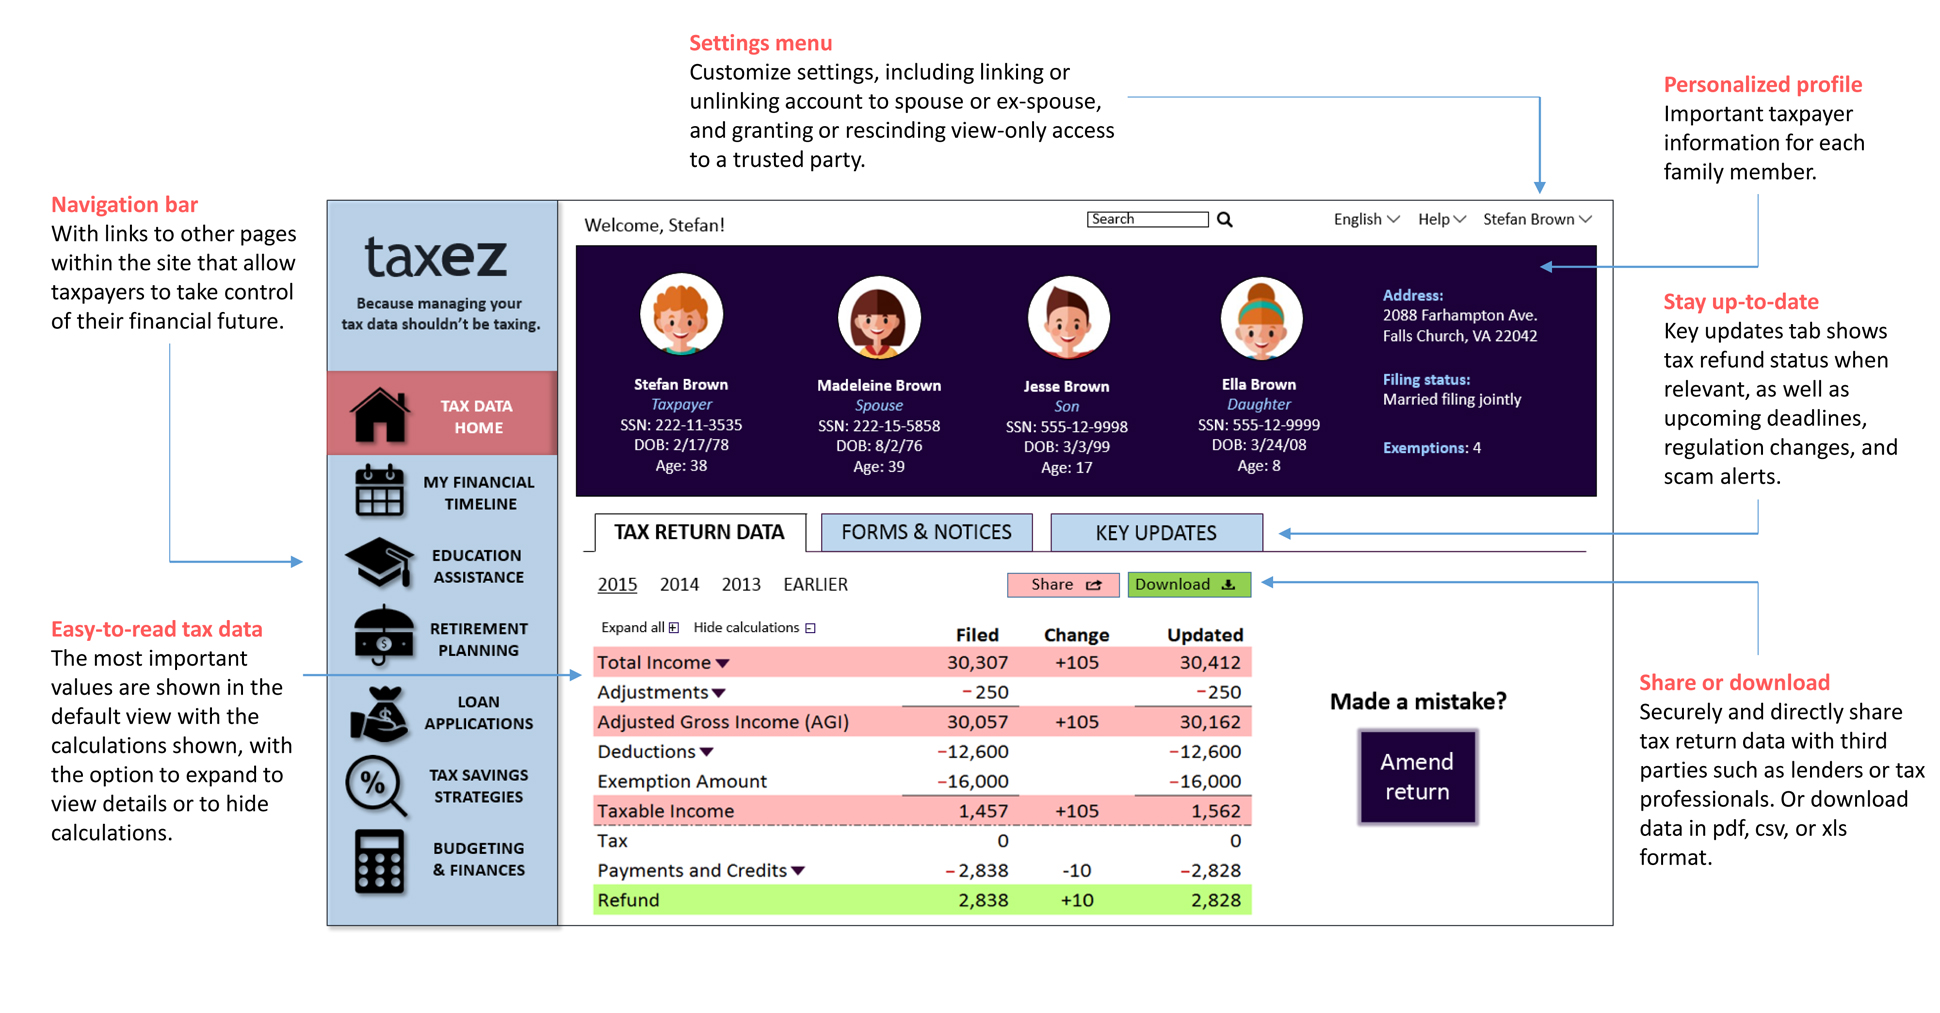 A page from a tax design challenge submission. This page calls out key features of the design including the navigation bar, settings menu, personalized profile, key updates, the option to share or download tax data, and an easy-to-read format.